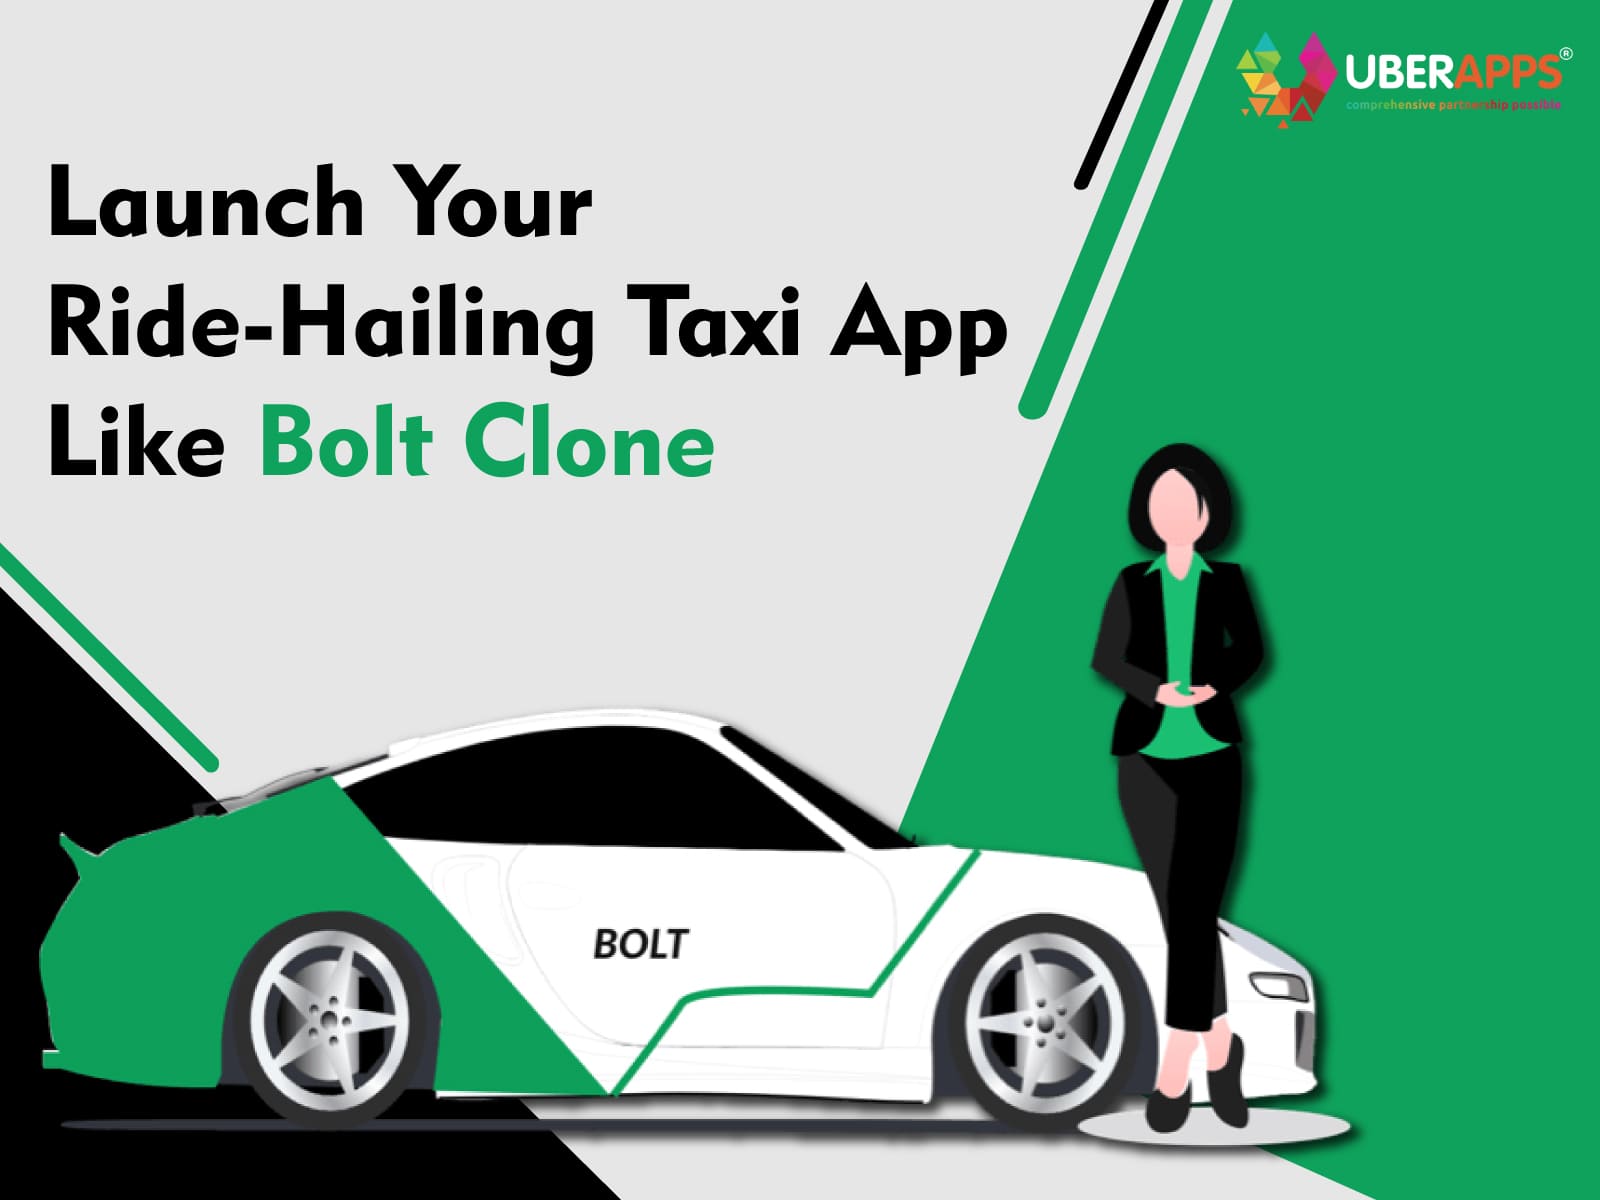 Launch Your Ride-Hailing Taxi App Like Bolt Clone